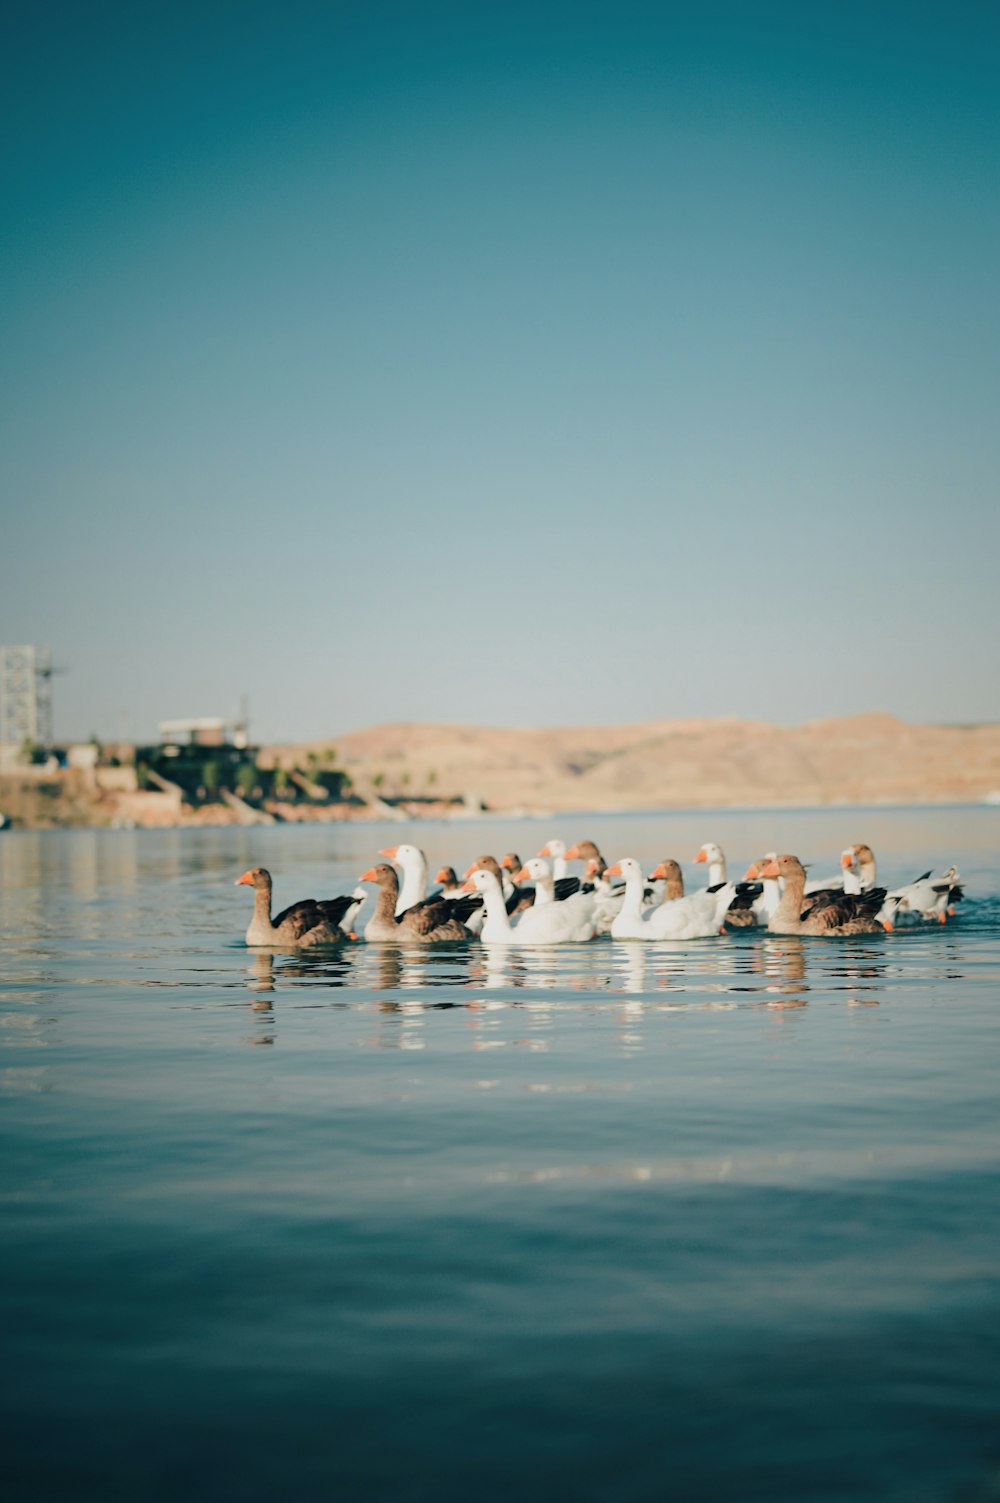 a group of birds in a body of water